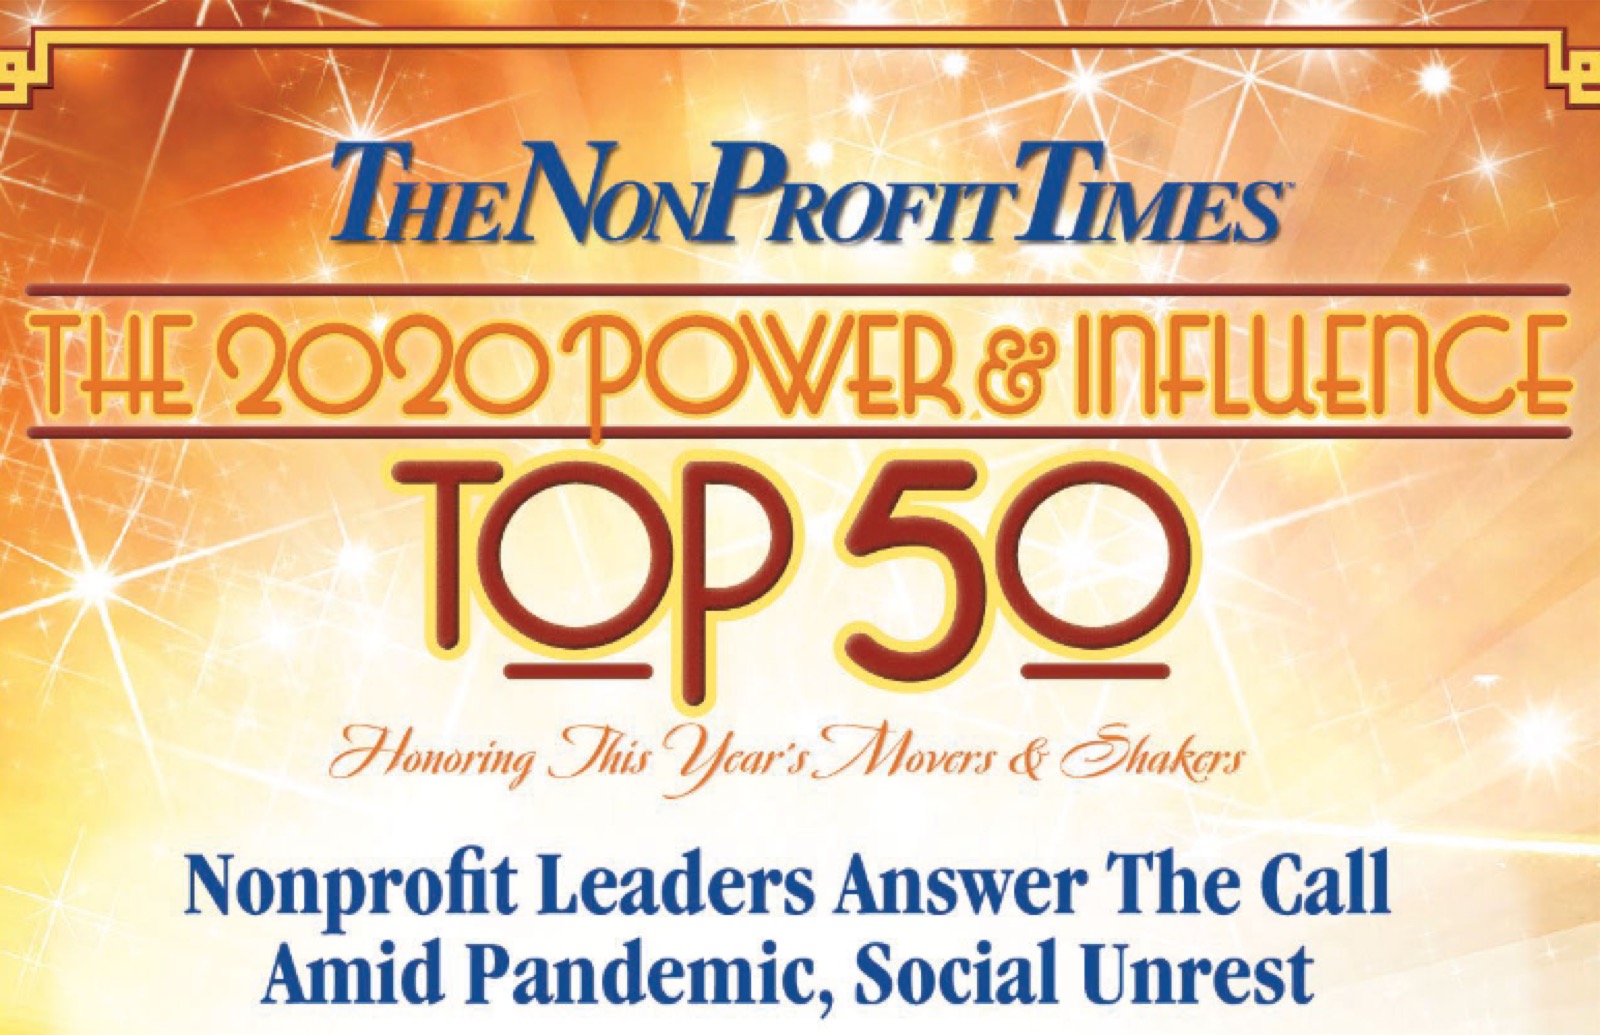 A banner promoting the Non-Profit Times’ Power and Influence Top 50 list for 2020, with gold and white sparkles in the background.